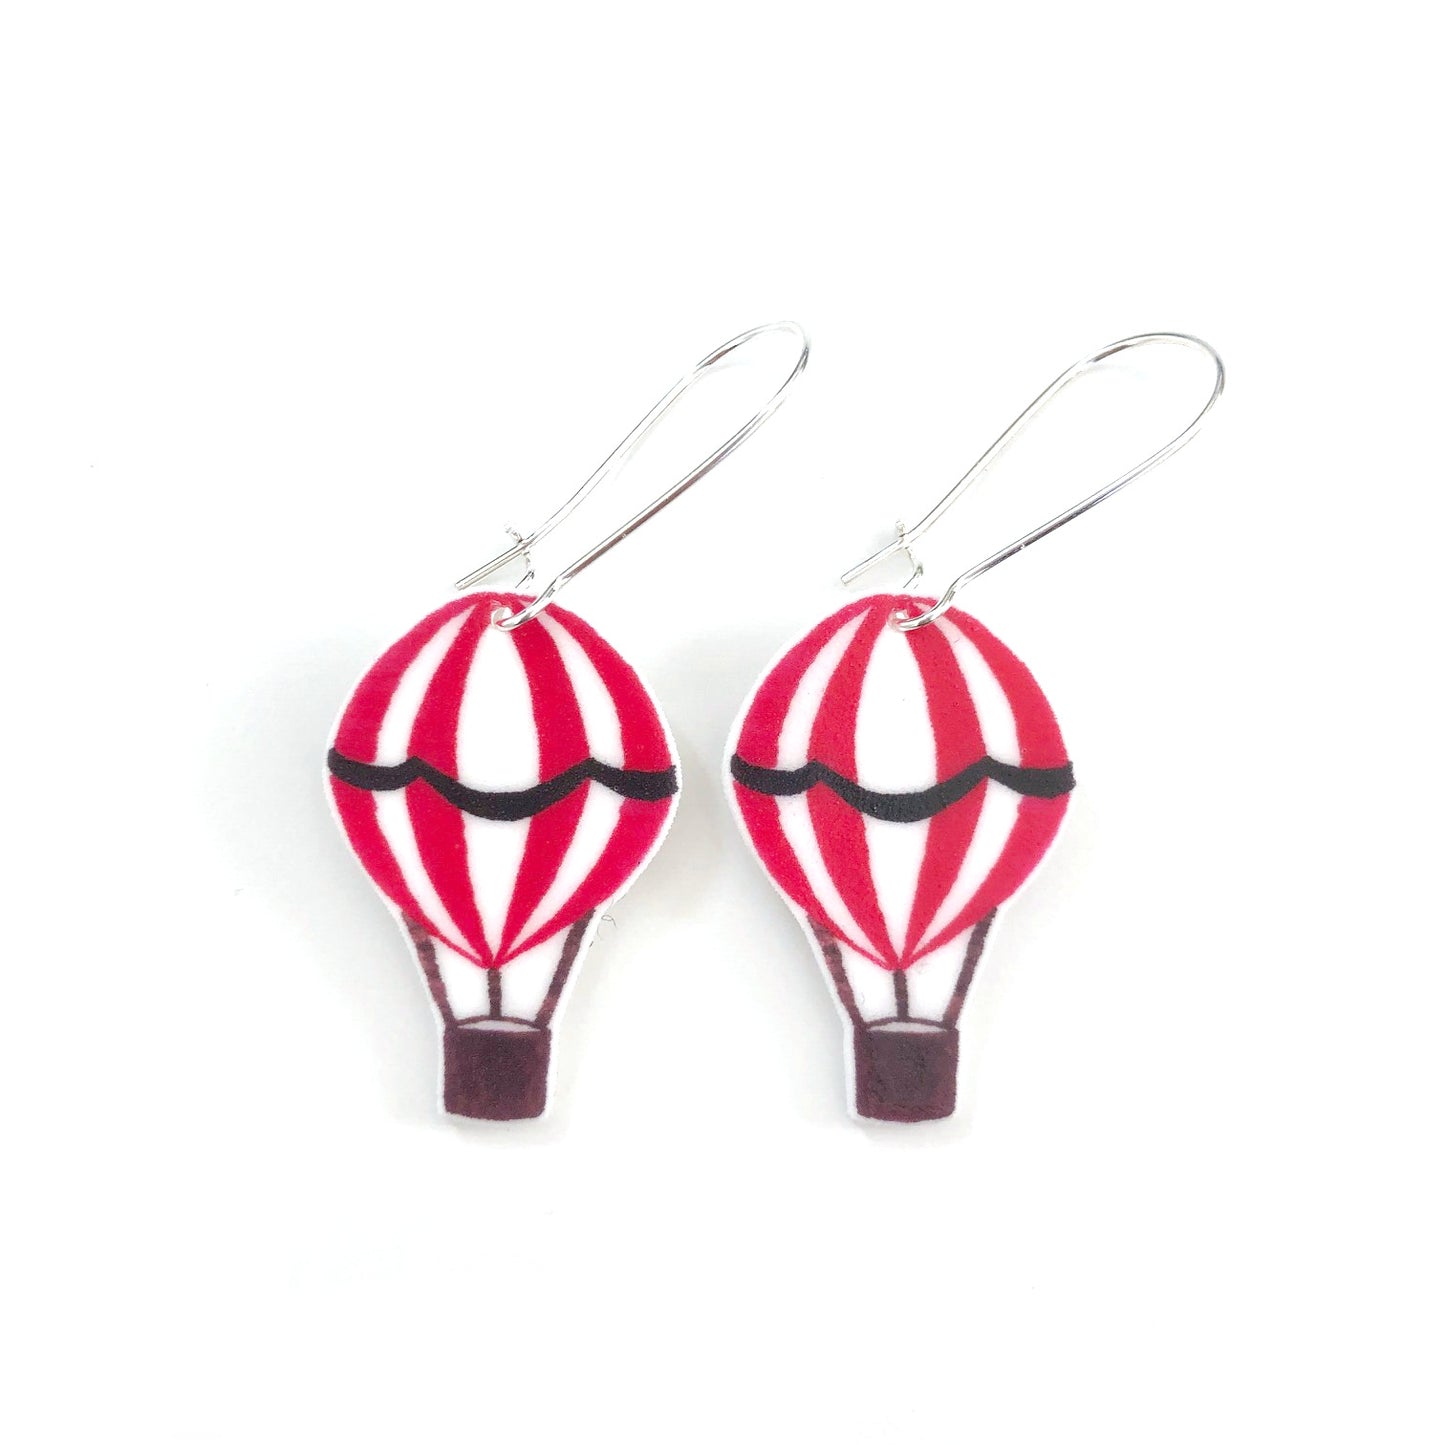 Red and white striped hot air balloon drop earrings